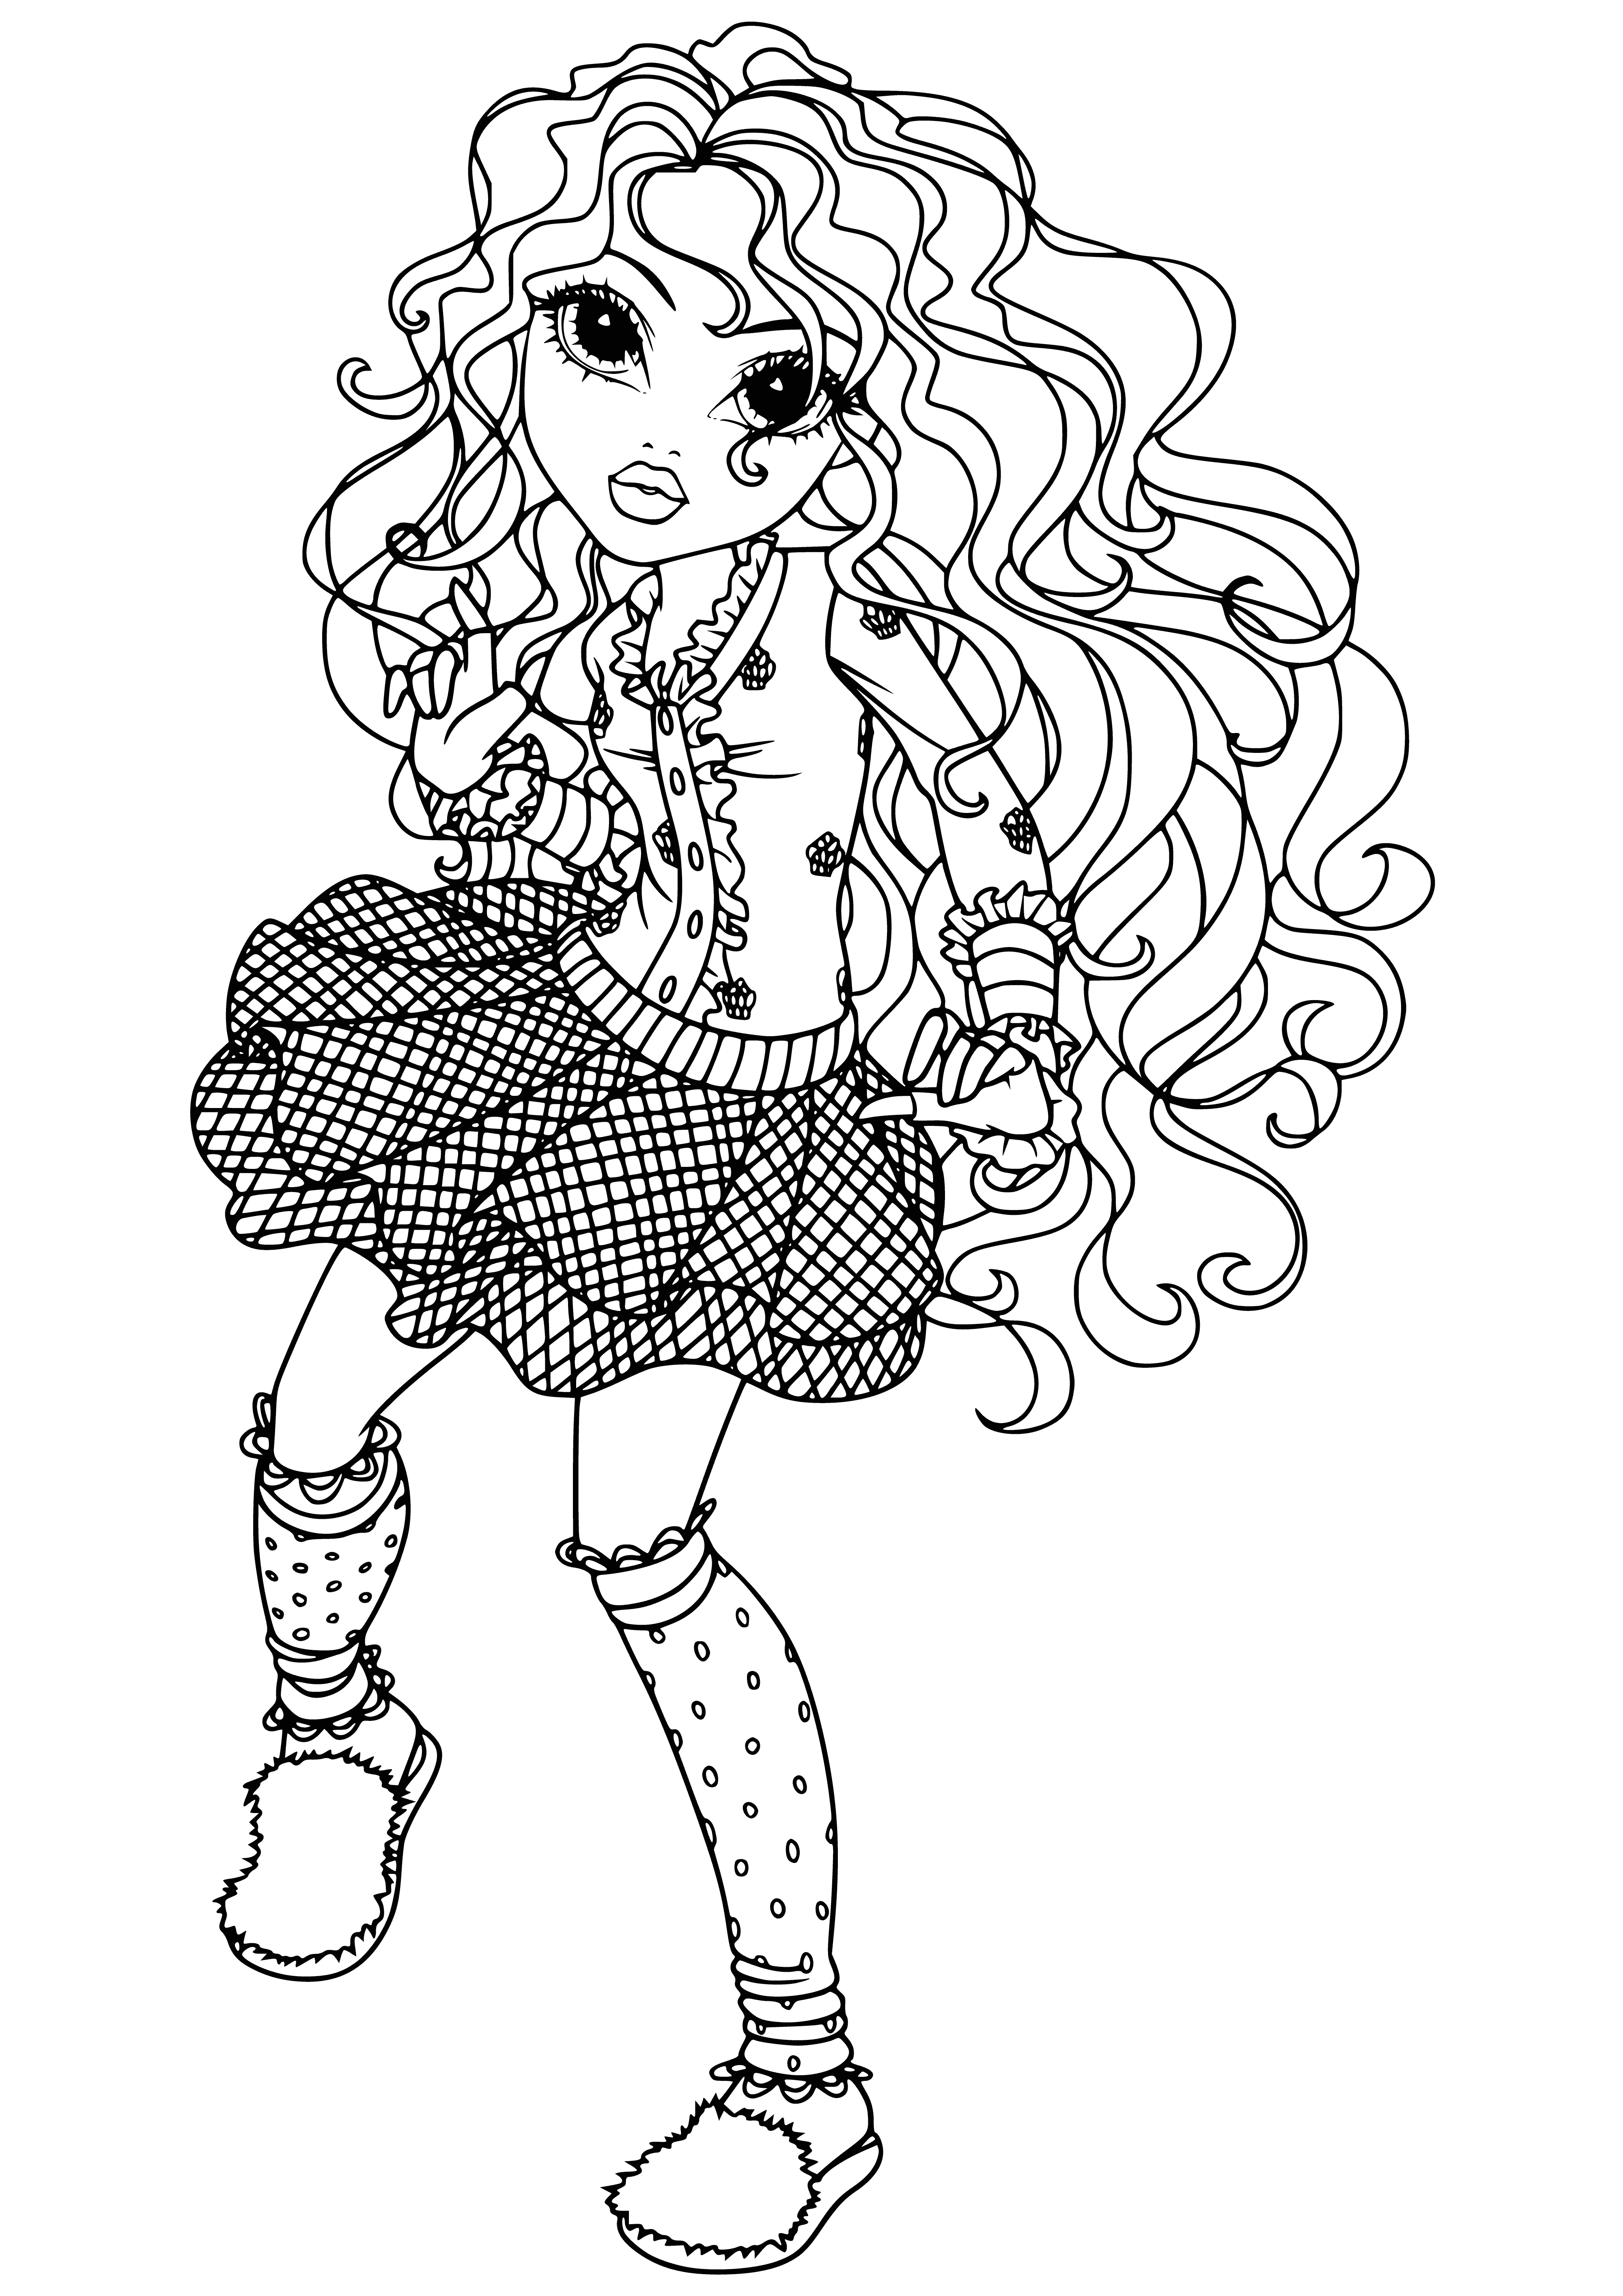 coloring page: Girl with dark hair and eyes wearing dark green & blue has black & white backpack. #coloringpage